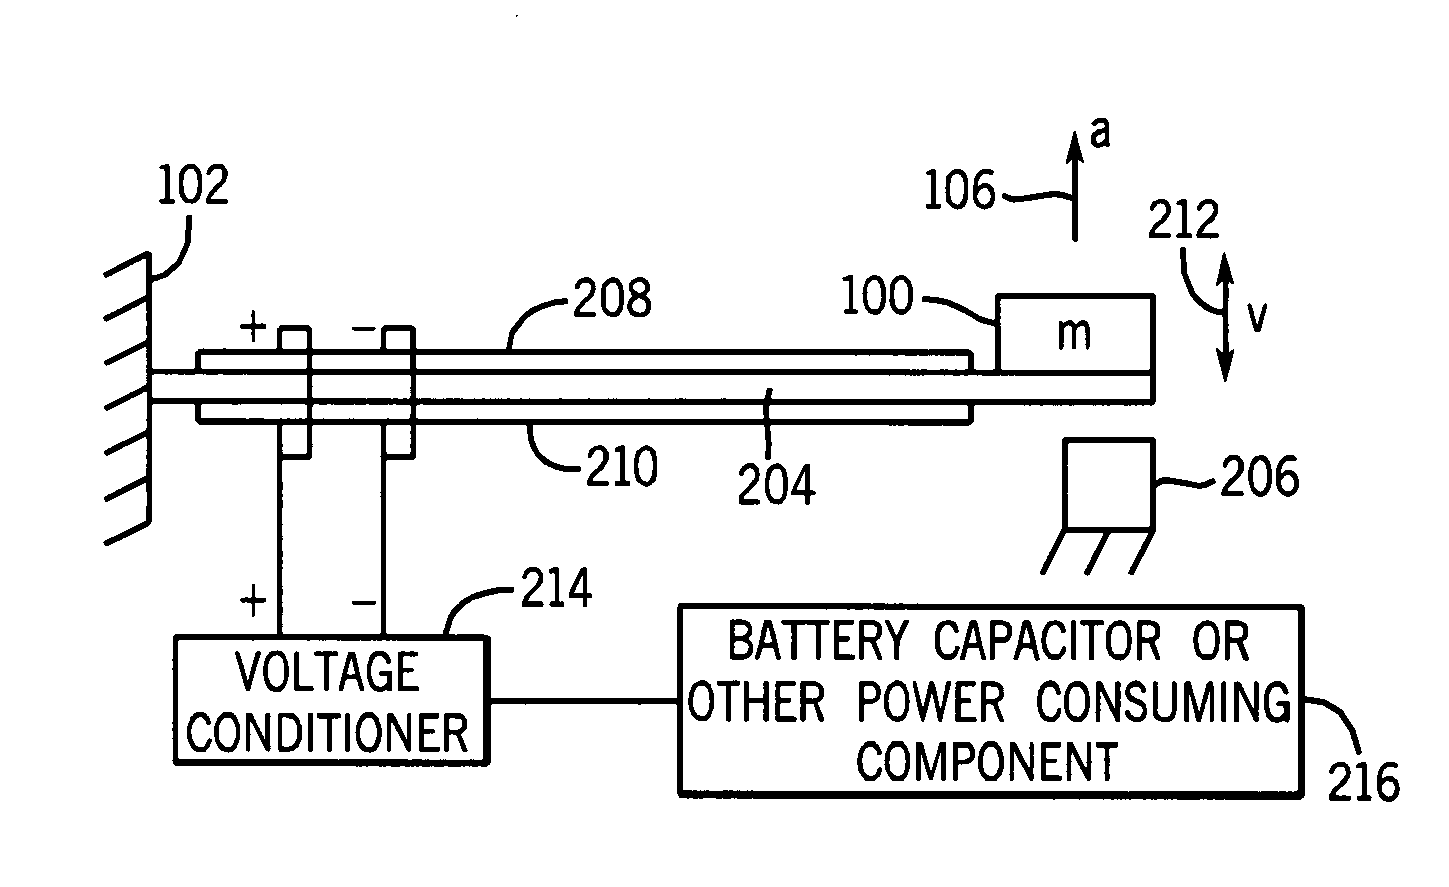 Power supplies for projectiles and other devices